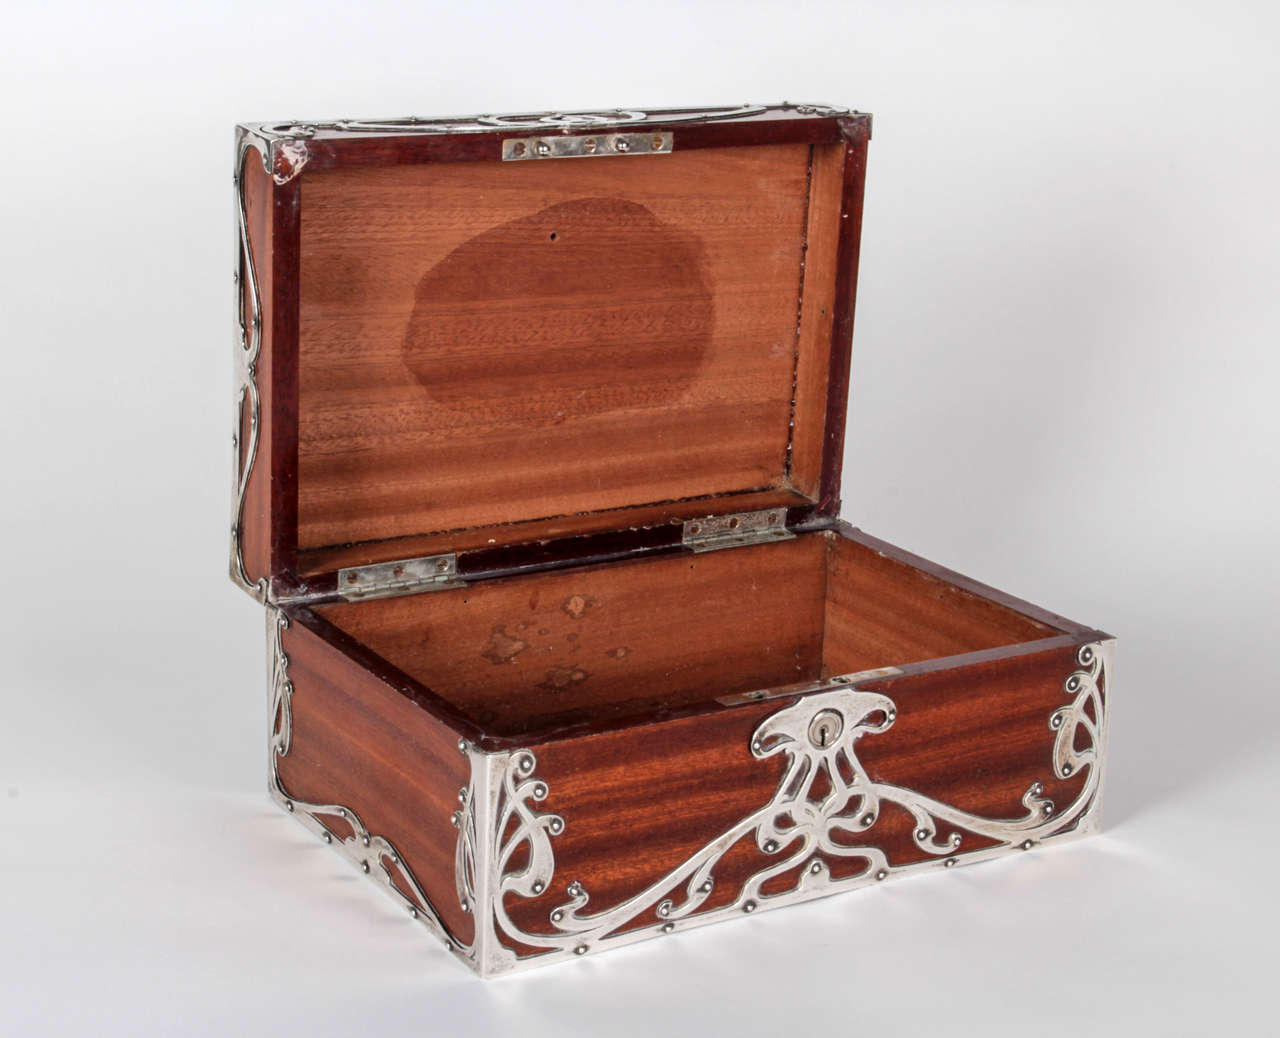 American Black Starr and Frost Art Nouveau Sterling Mounted Jewelry Box, circa 1900